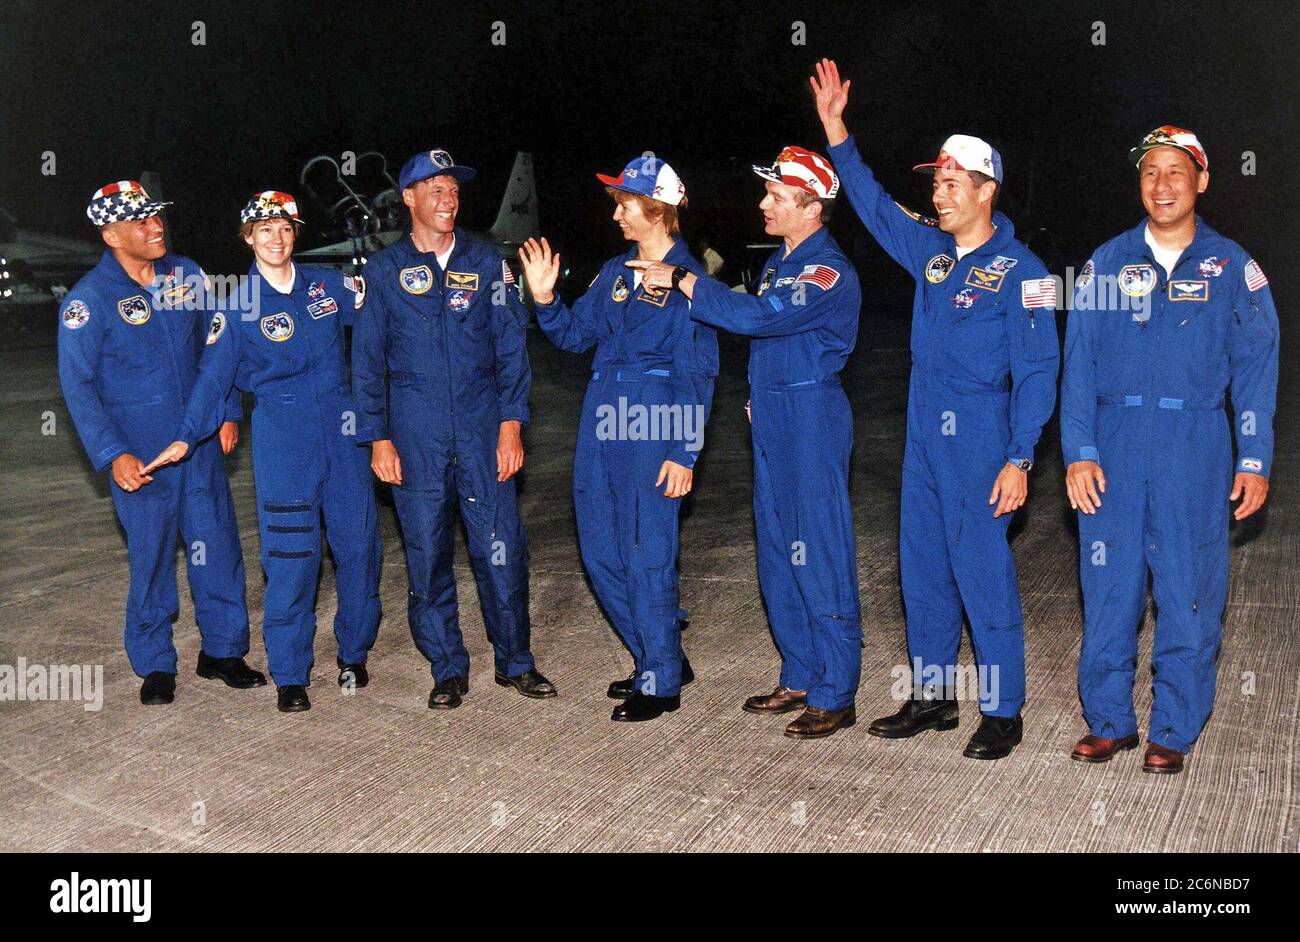 STS-84 crew members greet press representatives and other onlookers after their arrival at KSC’s Shuttle Landing Facility Sunday evening (May 12, 1997), about an hour before the countdown clock will begin ticking toward the scheduled May 15 launch of the Space Shuttle Atlantis on Mission STS-84. From left, are Mission Specialist Carlos I. Noriega, Pilot Eileen Marie Collins, Mission Specialist C. Michael Foale, Mission Specialist Elena V. Kondakova of the Russian Space Agency, Commander Charles J. Precourt, Mission Specialist Jean-Francois Clervoy of the European Space Agency, and Mission Spec Stock Photo